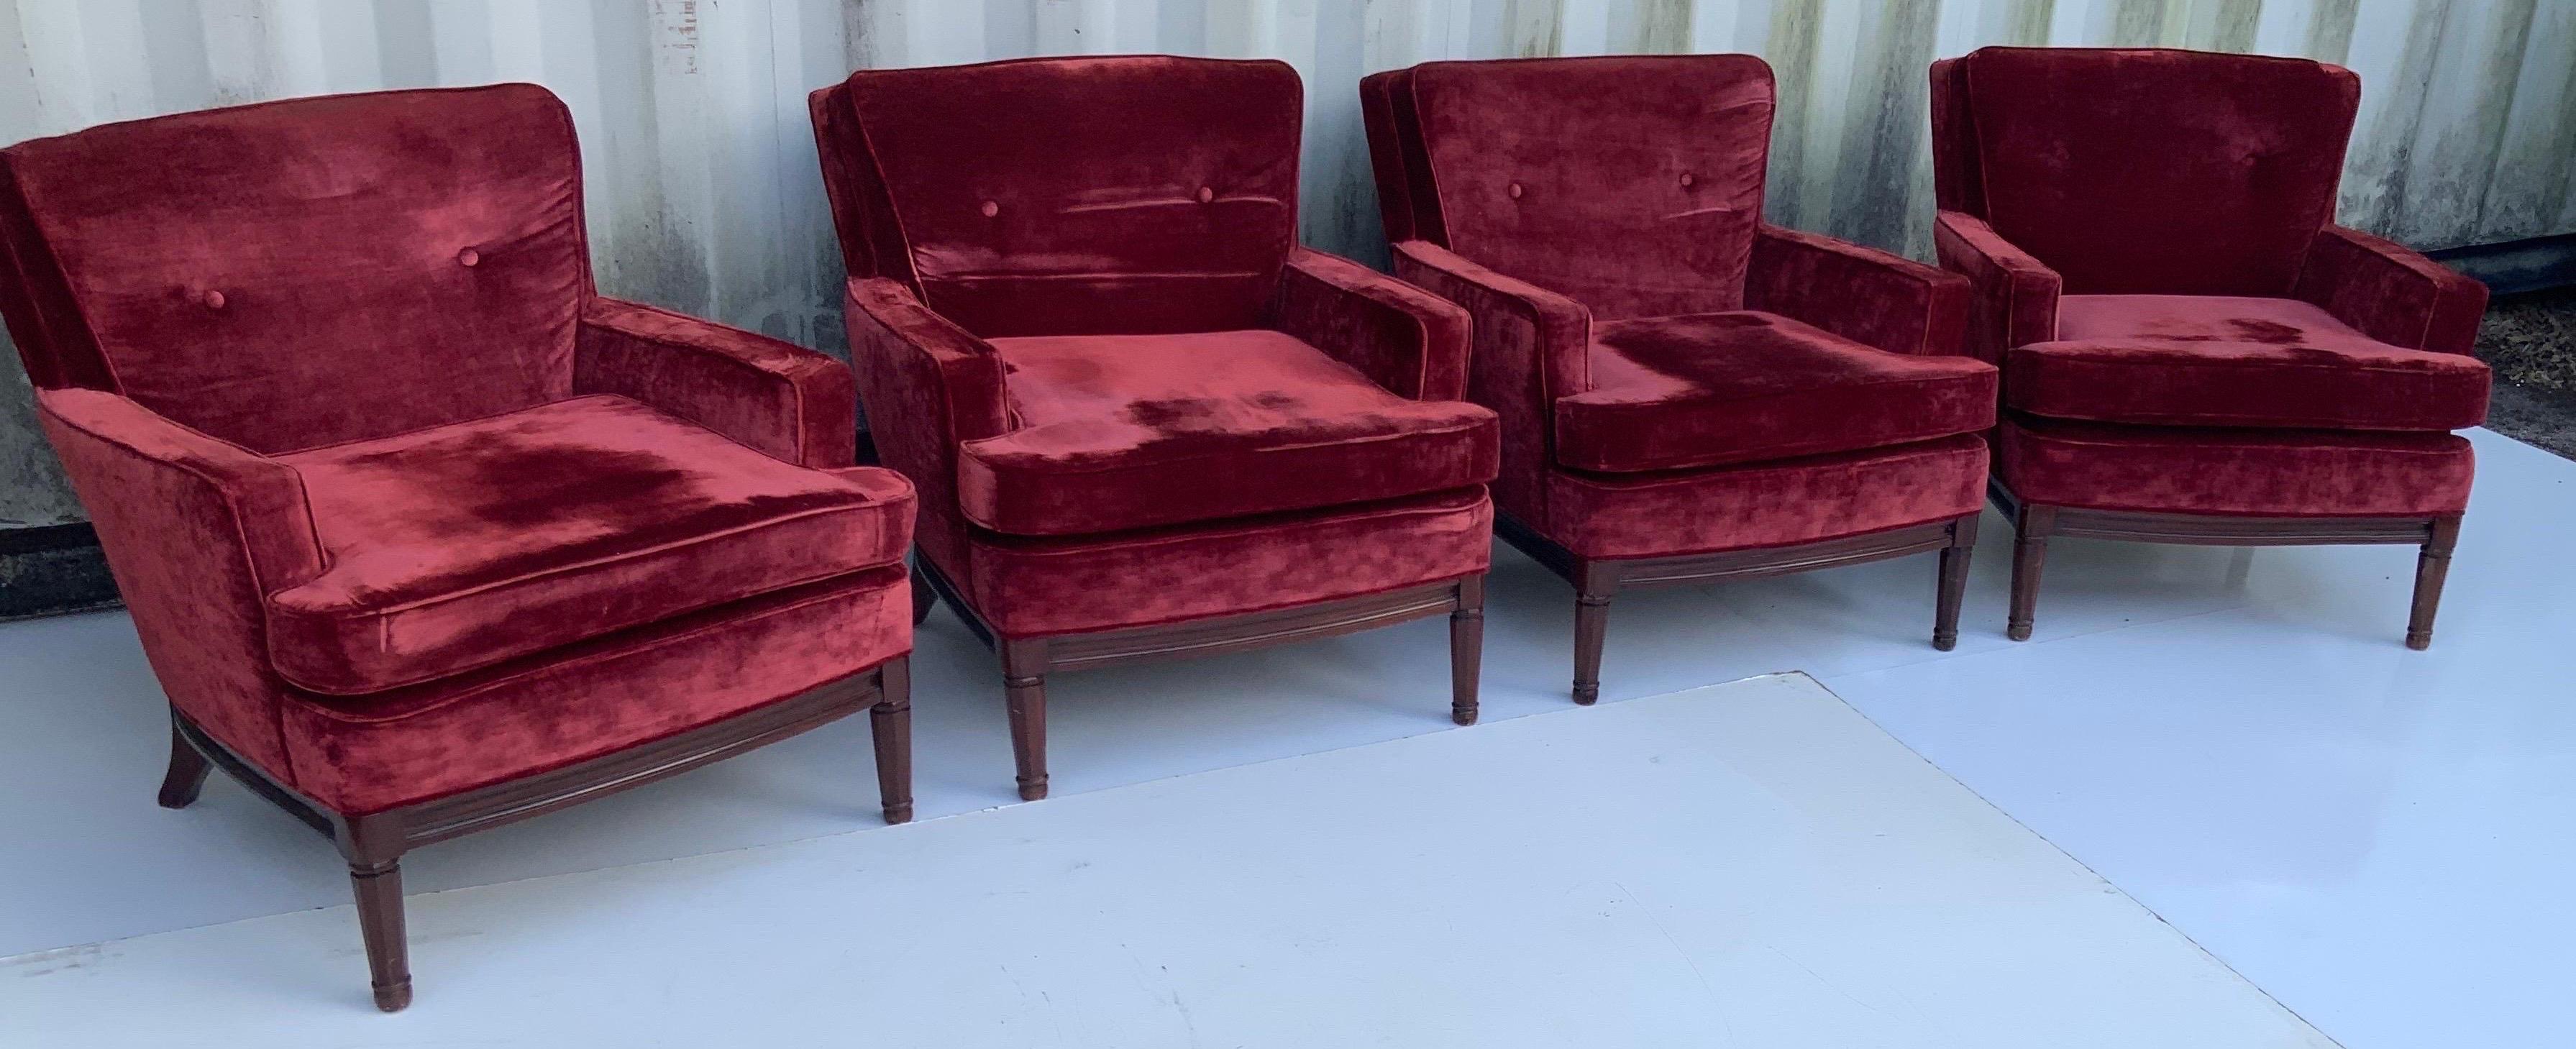 Pair of Neoclassical Maison Jansen Lounge Chairs circa 1960, 2 Pairs Available For Sale 8